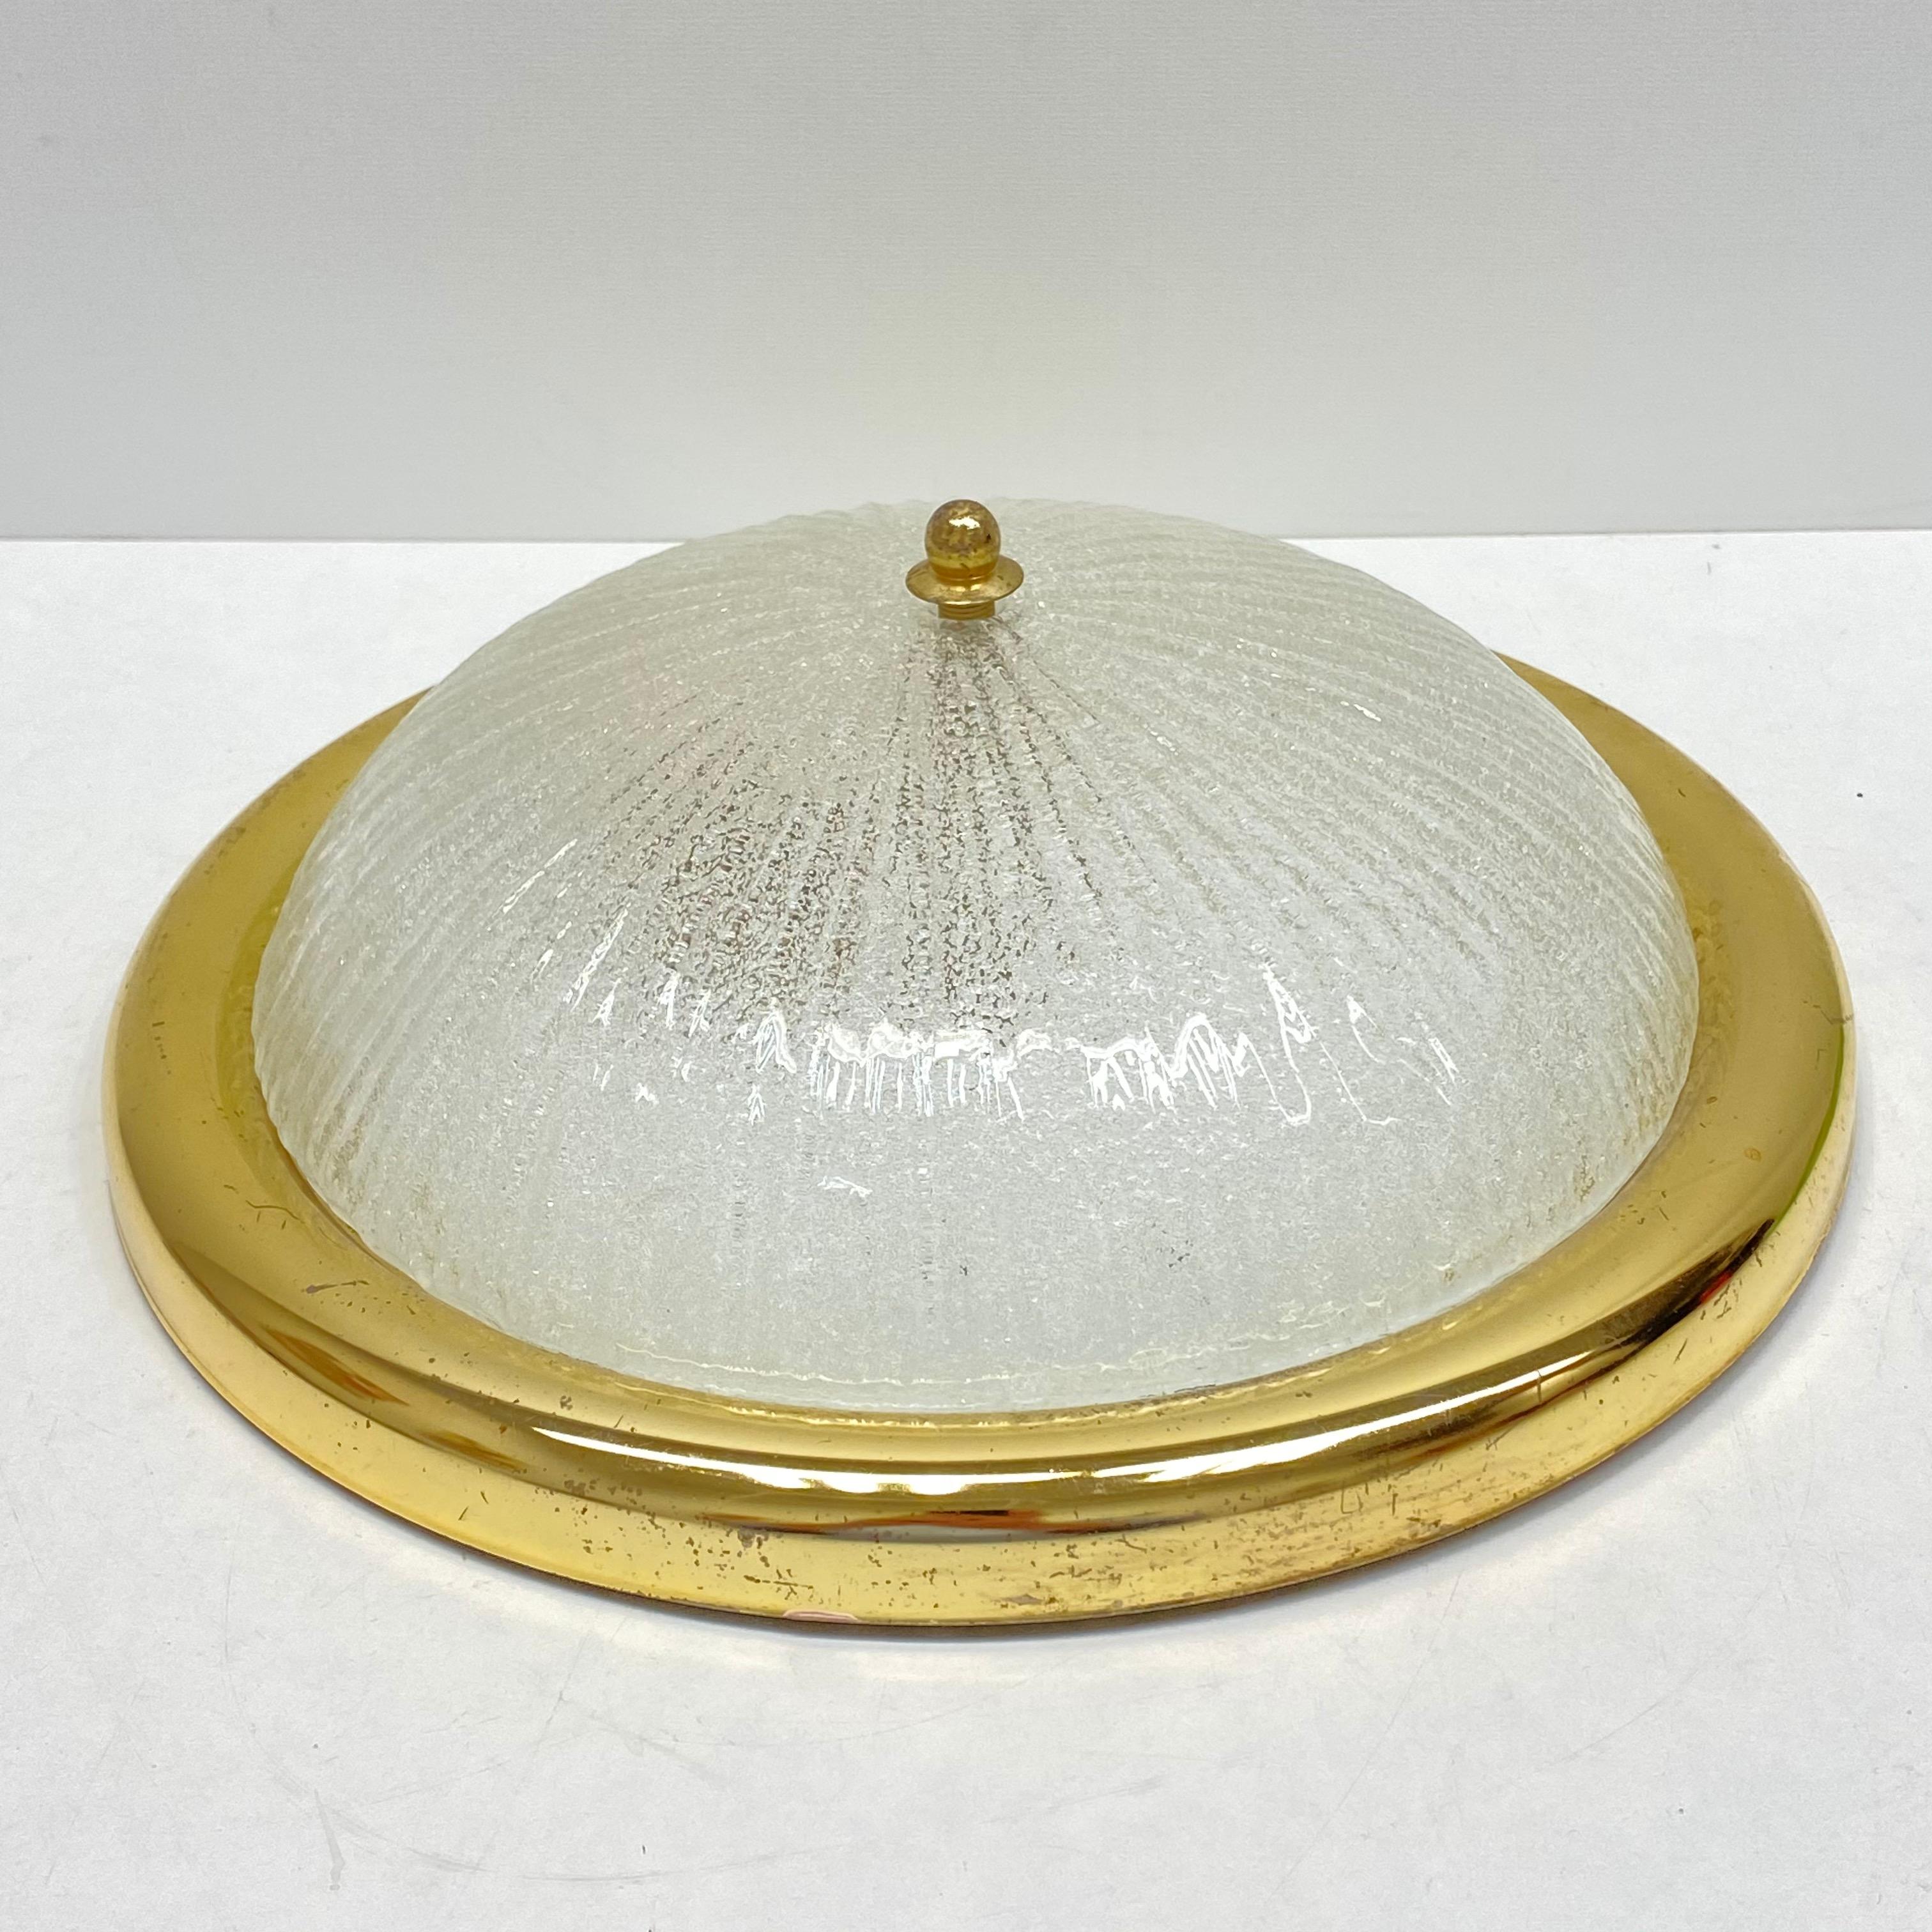 A brass and Murano glass flush mount by Fischer Leuchten. Very heavy Murano glass. The flush mount requires one European E27 Edison bulb, up to 60 watts.